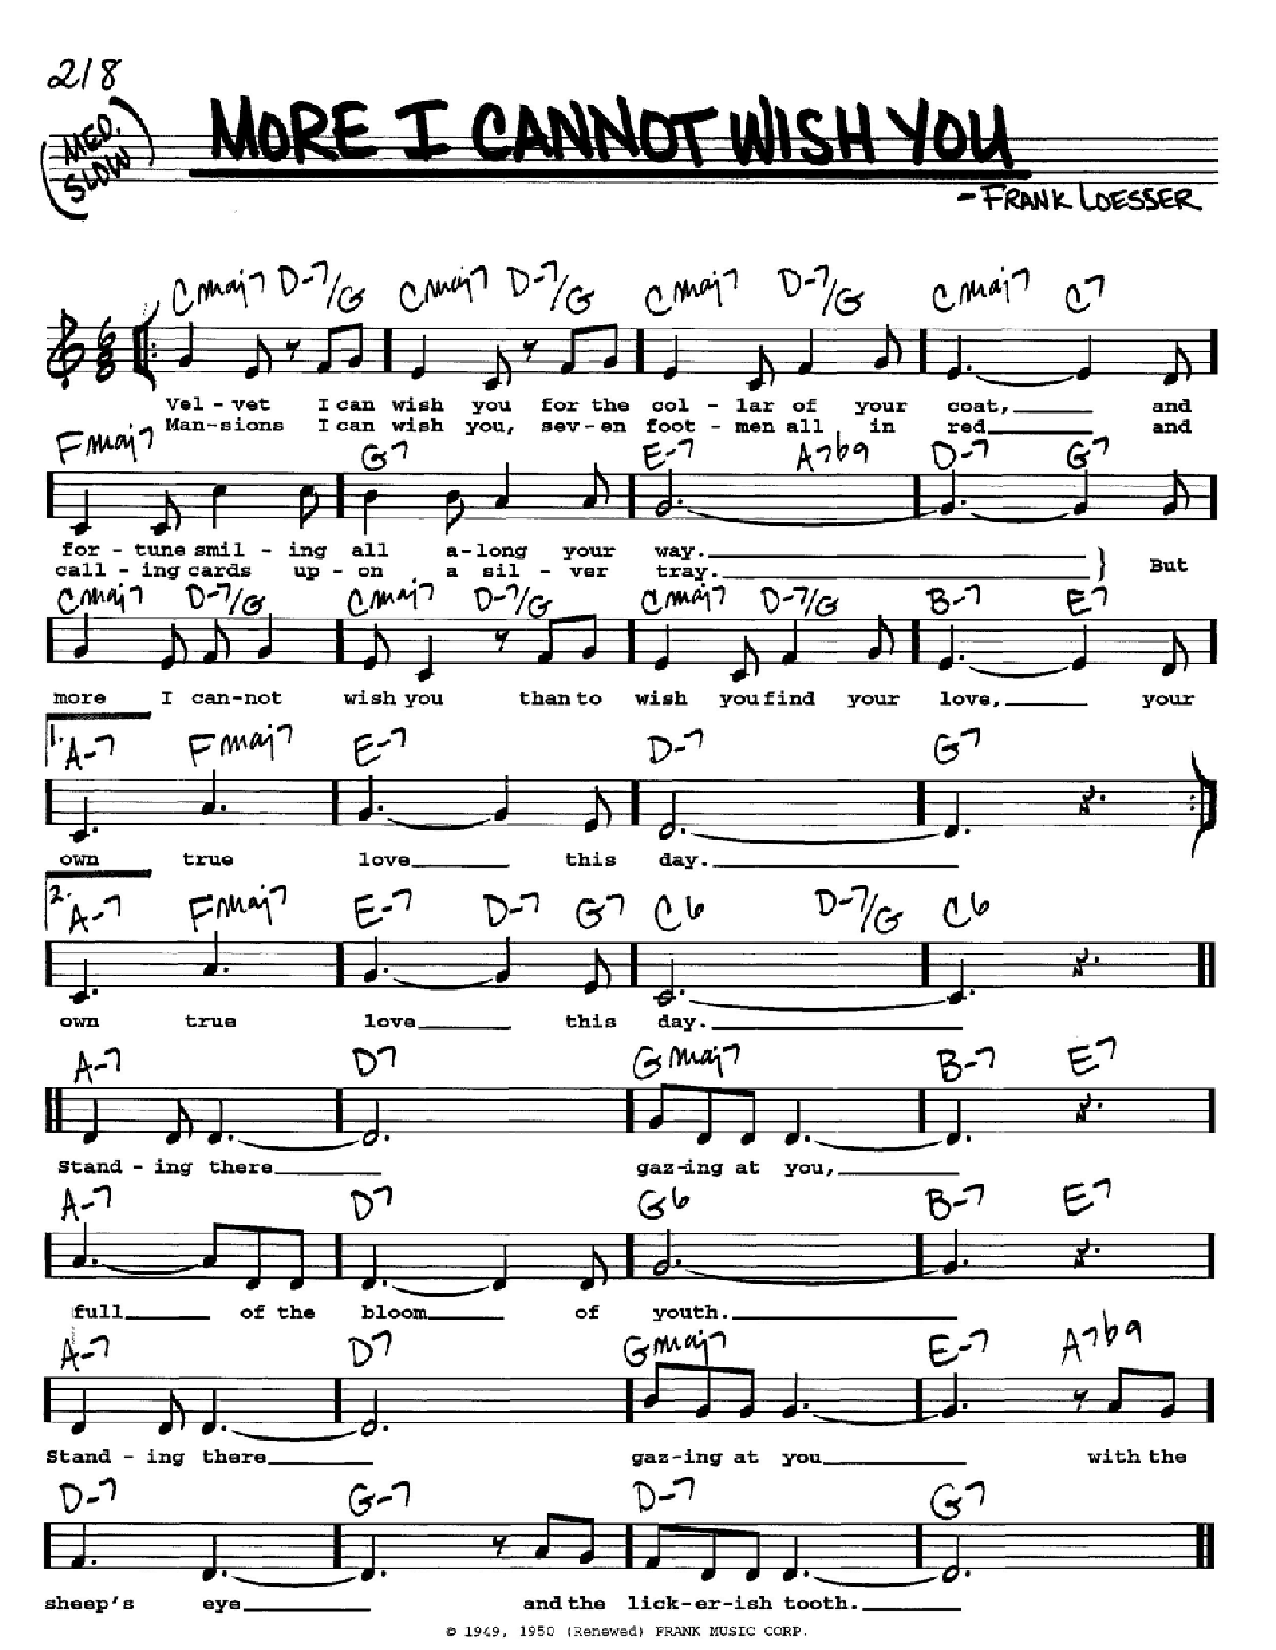 Download Frank Loesser More I Cannot Wish You Sheet Music